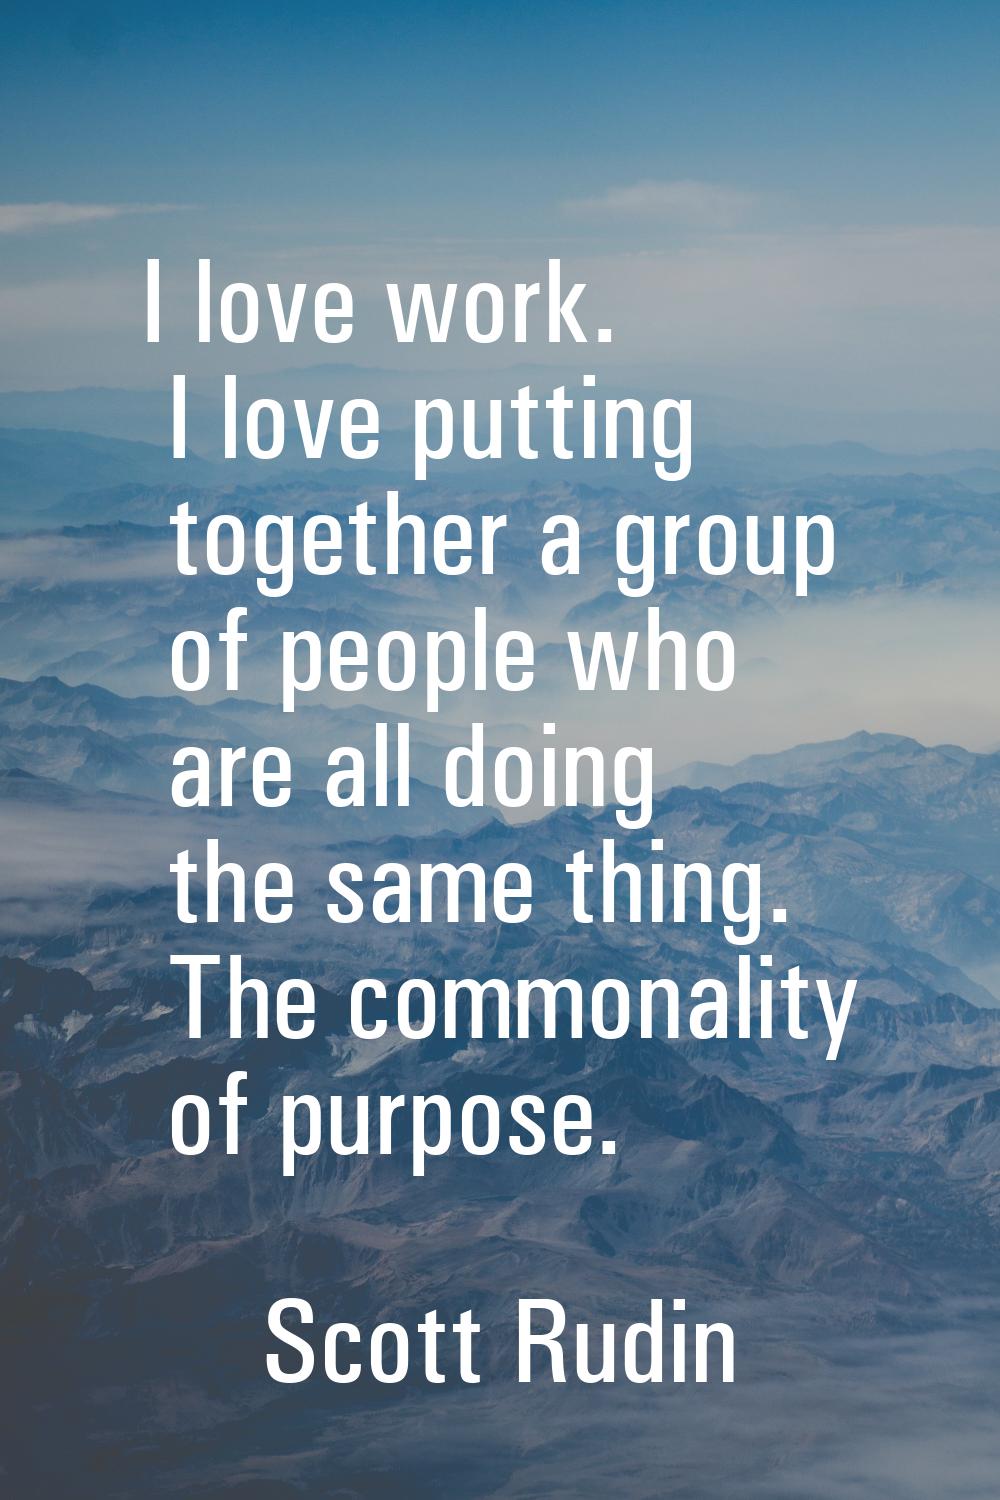 I love work. I love putting together a group of people who are all doing the same thing. The common